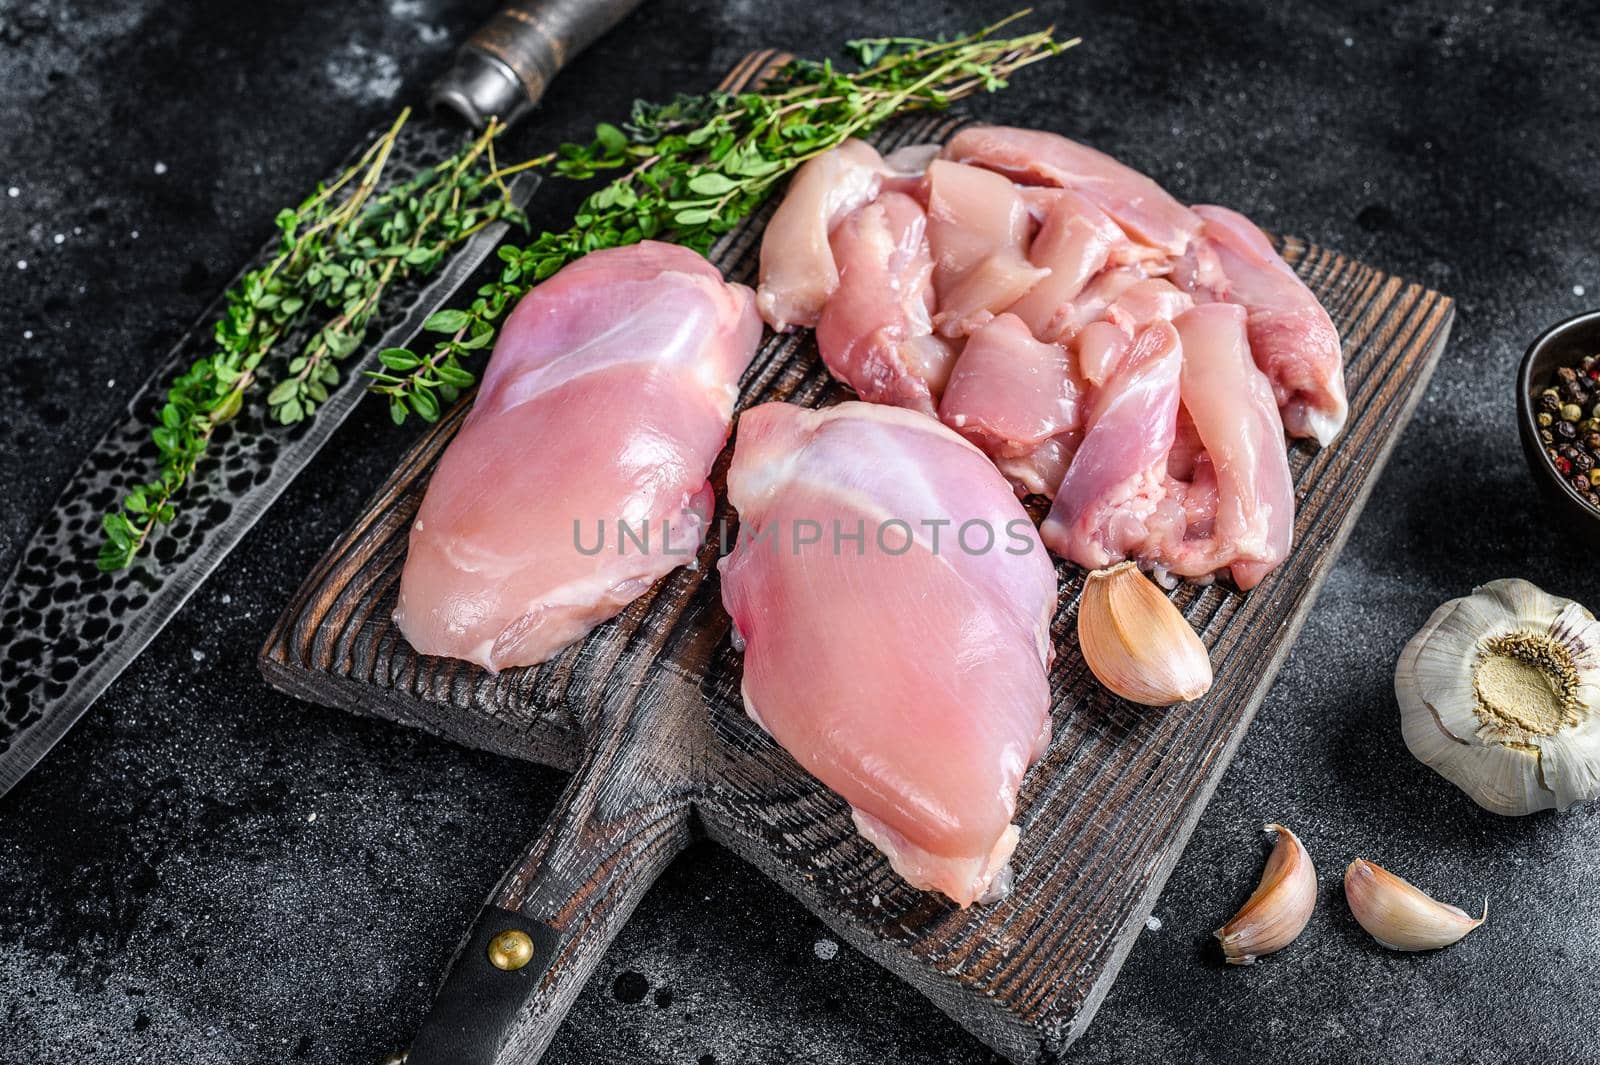 Sliced Raw Chicken thigh fillet on a wooden cutting board. Black background. Top view.